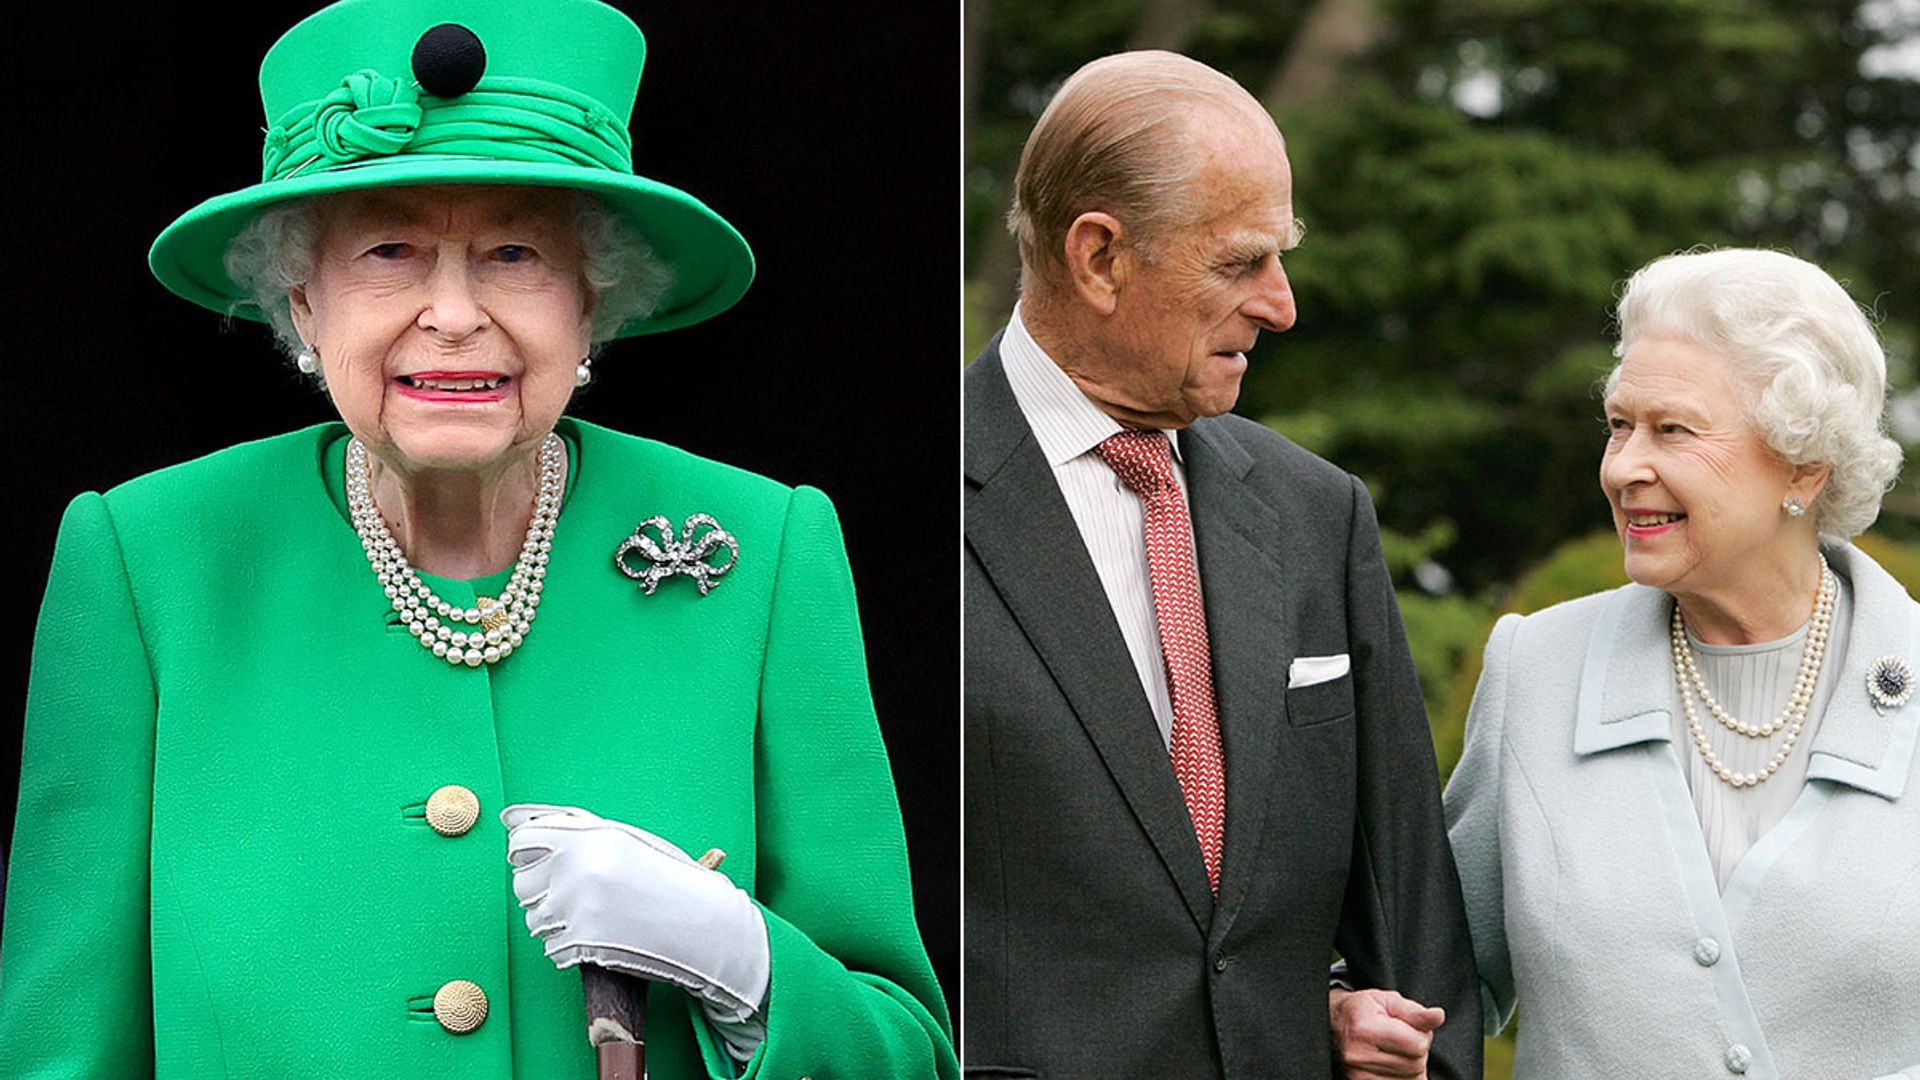 The subtle way the Queen honoured Prince Philip during the Platinum Jubilee